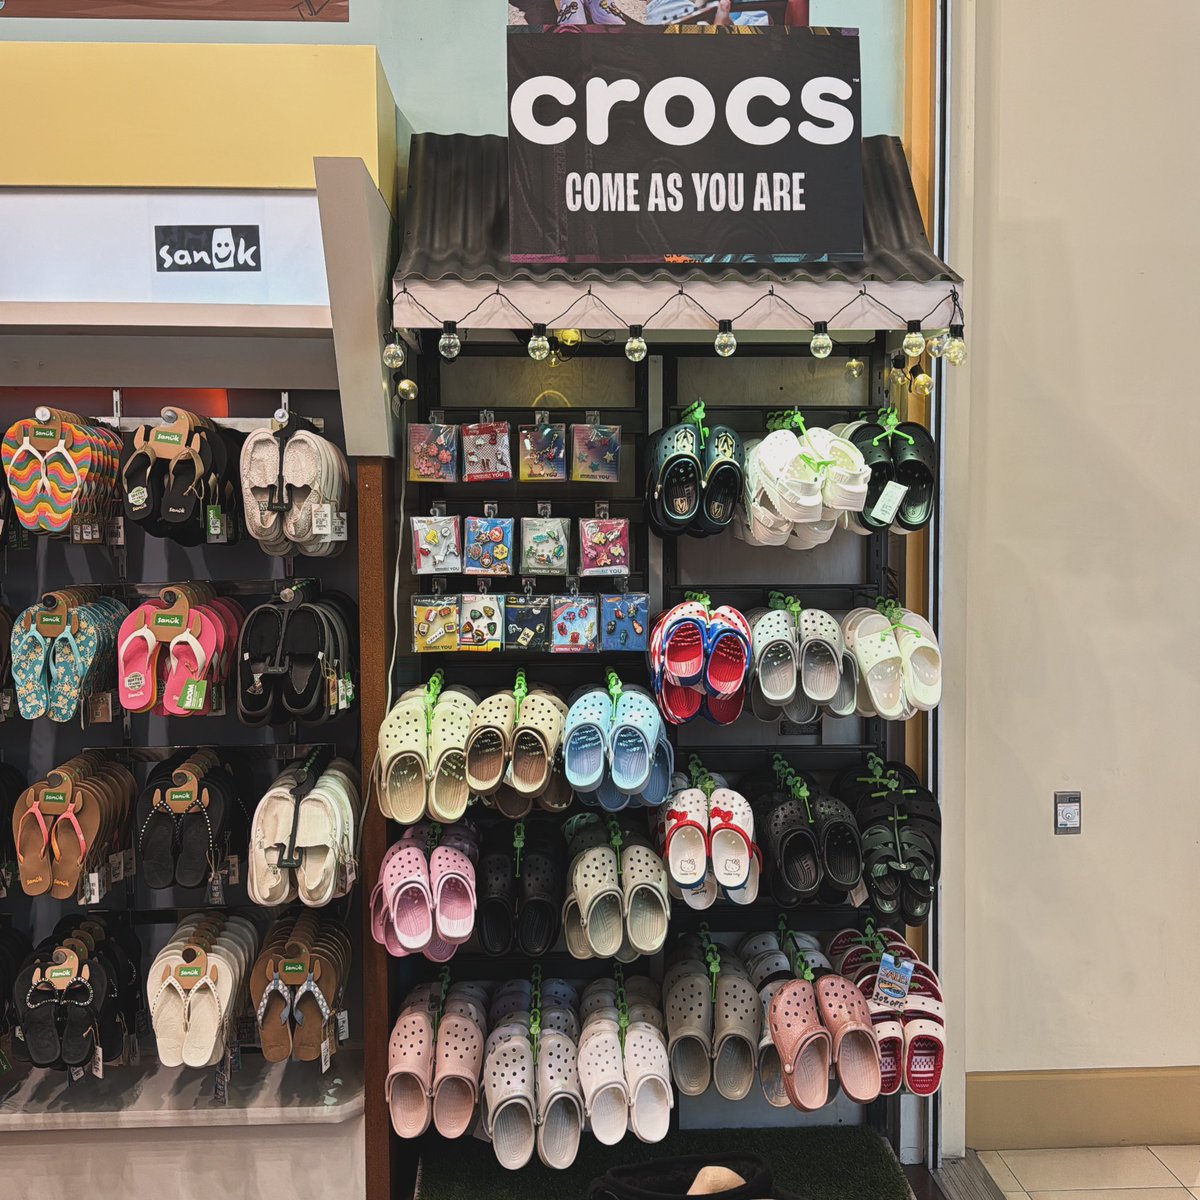 Tons of new @Crocs colors in stock. 👏🏻🤩🛍️ Come grab your favorite pair! #crocs #flipflops #flipflopshops #thestrip #Mandalaybay #vegas #lasvegas #ffs #casino #freeyourtoes #Mall #TheShoppes